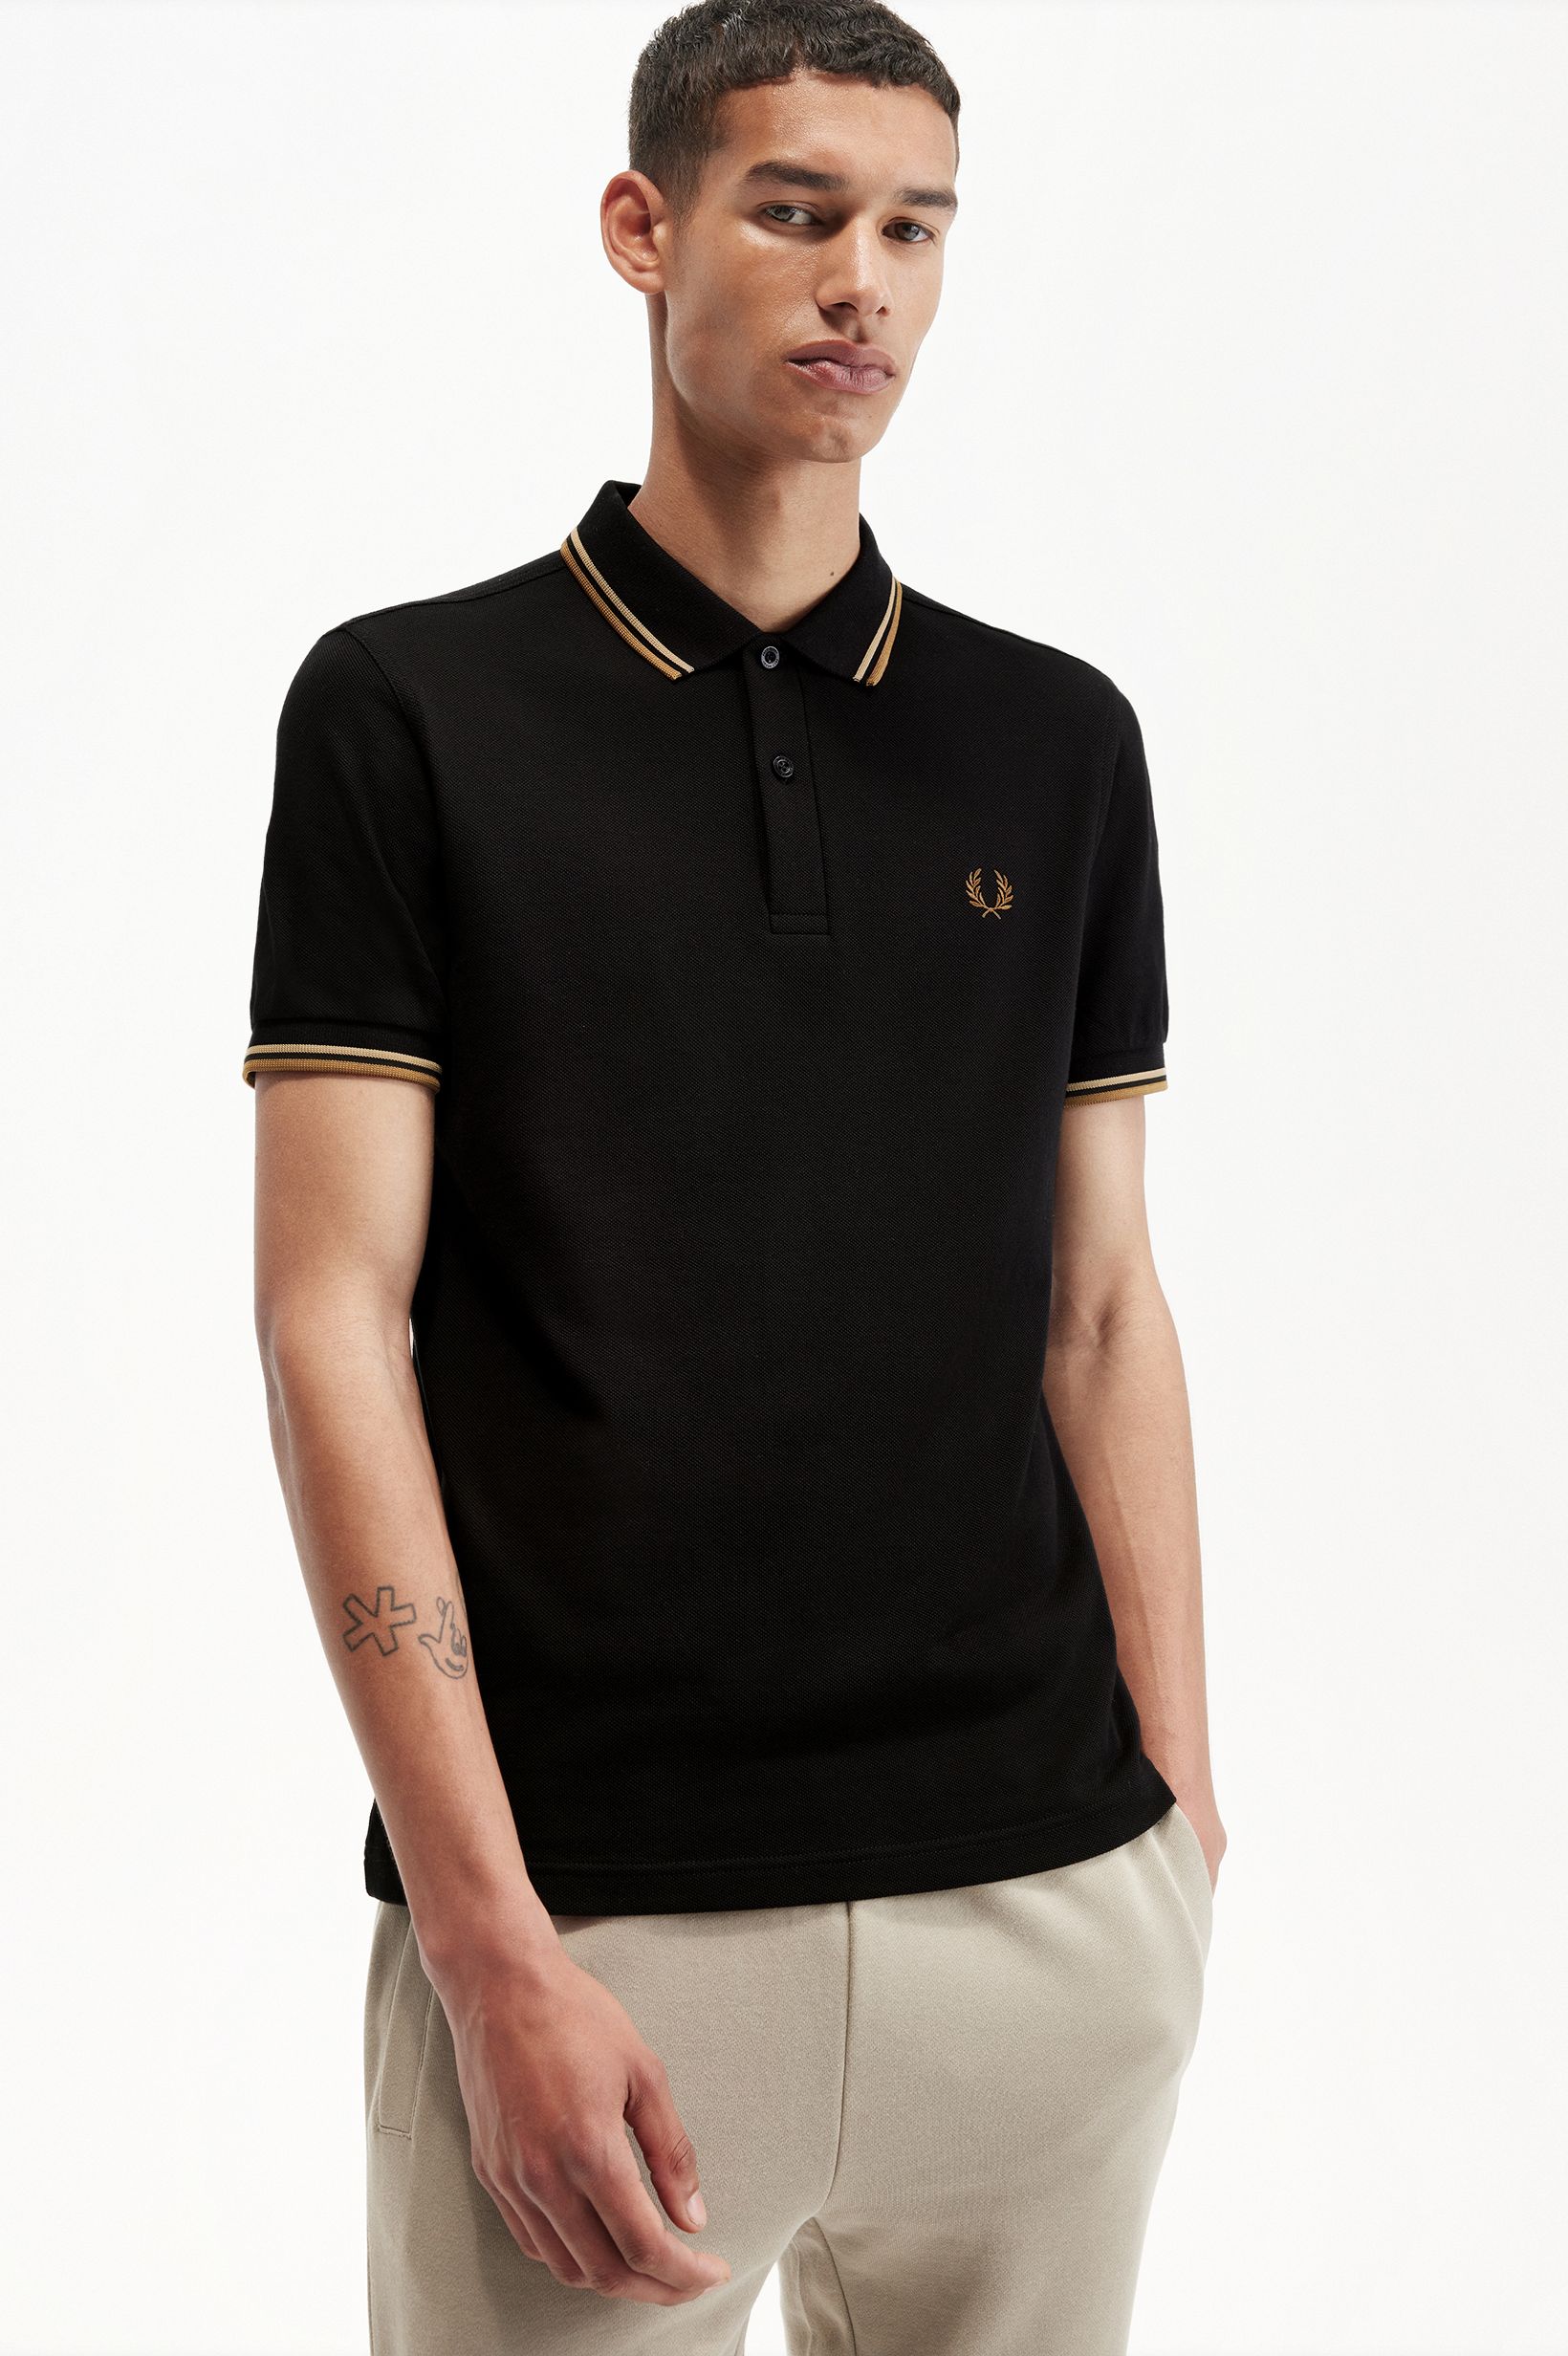 Fred Perry - TWIN TIPPED POLO SHIRT - Black/Warm Stone/Shaded Stone